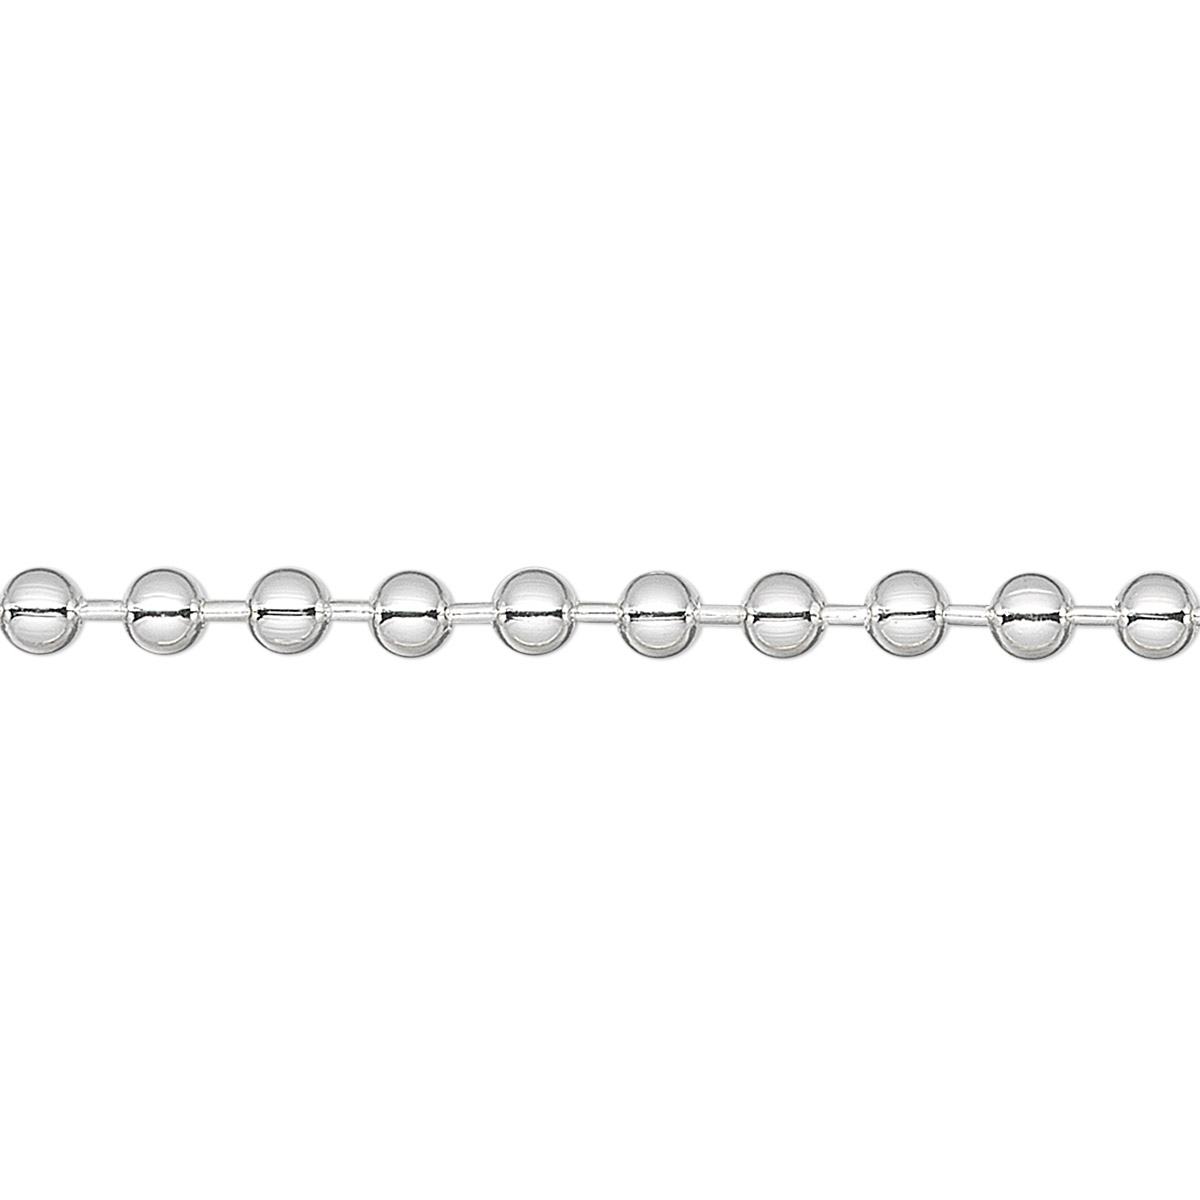 Chain, silver-plated steel, 3.2mm ball. Sold per 50-foot spool. - Fire ...